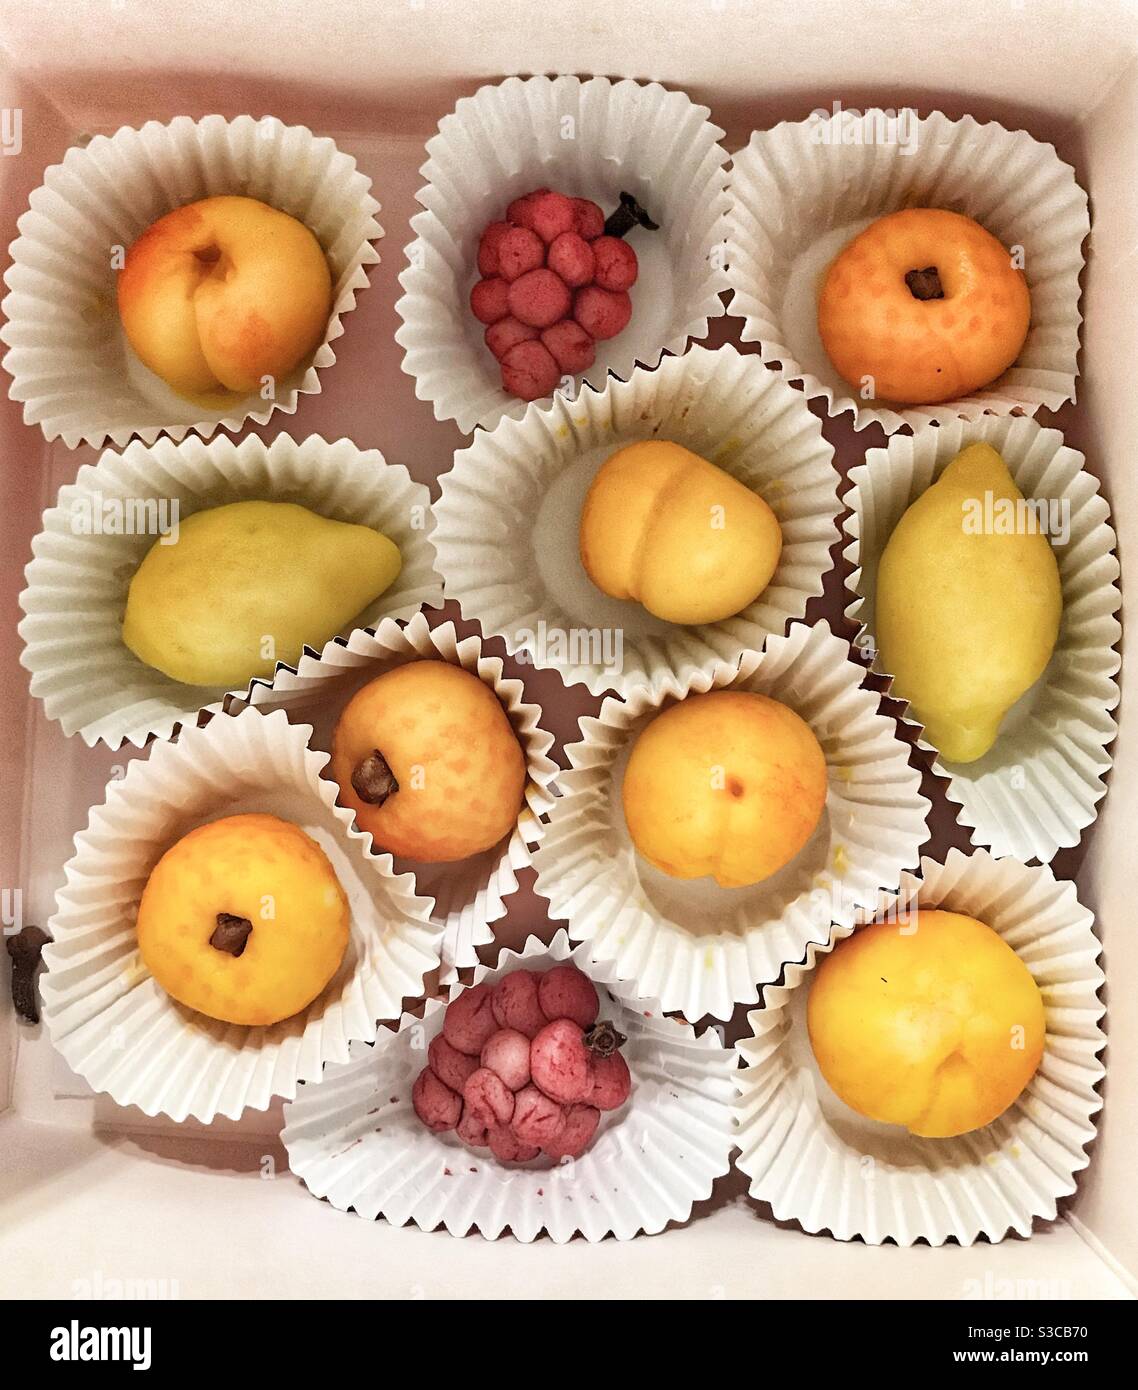 Selection of Homemade Marizipan Fruits in Petit Four Cases presented in a box Stock Photo